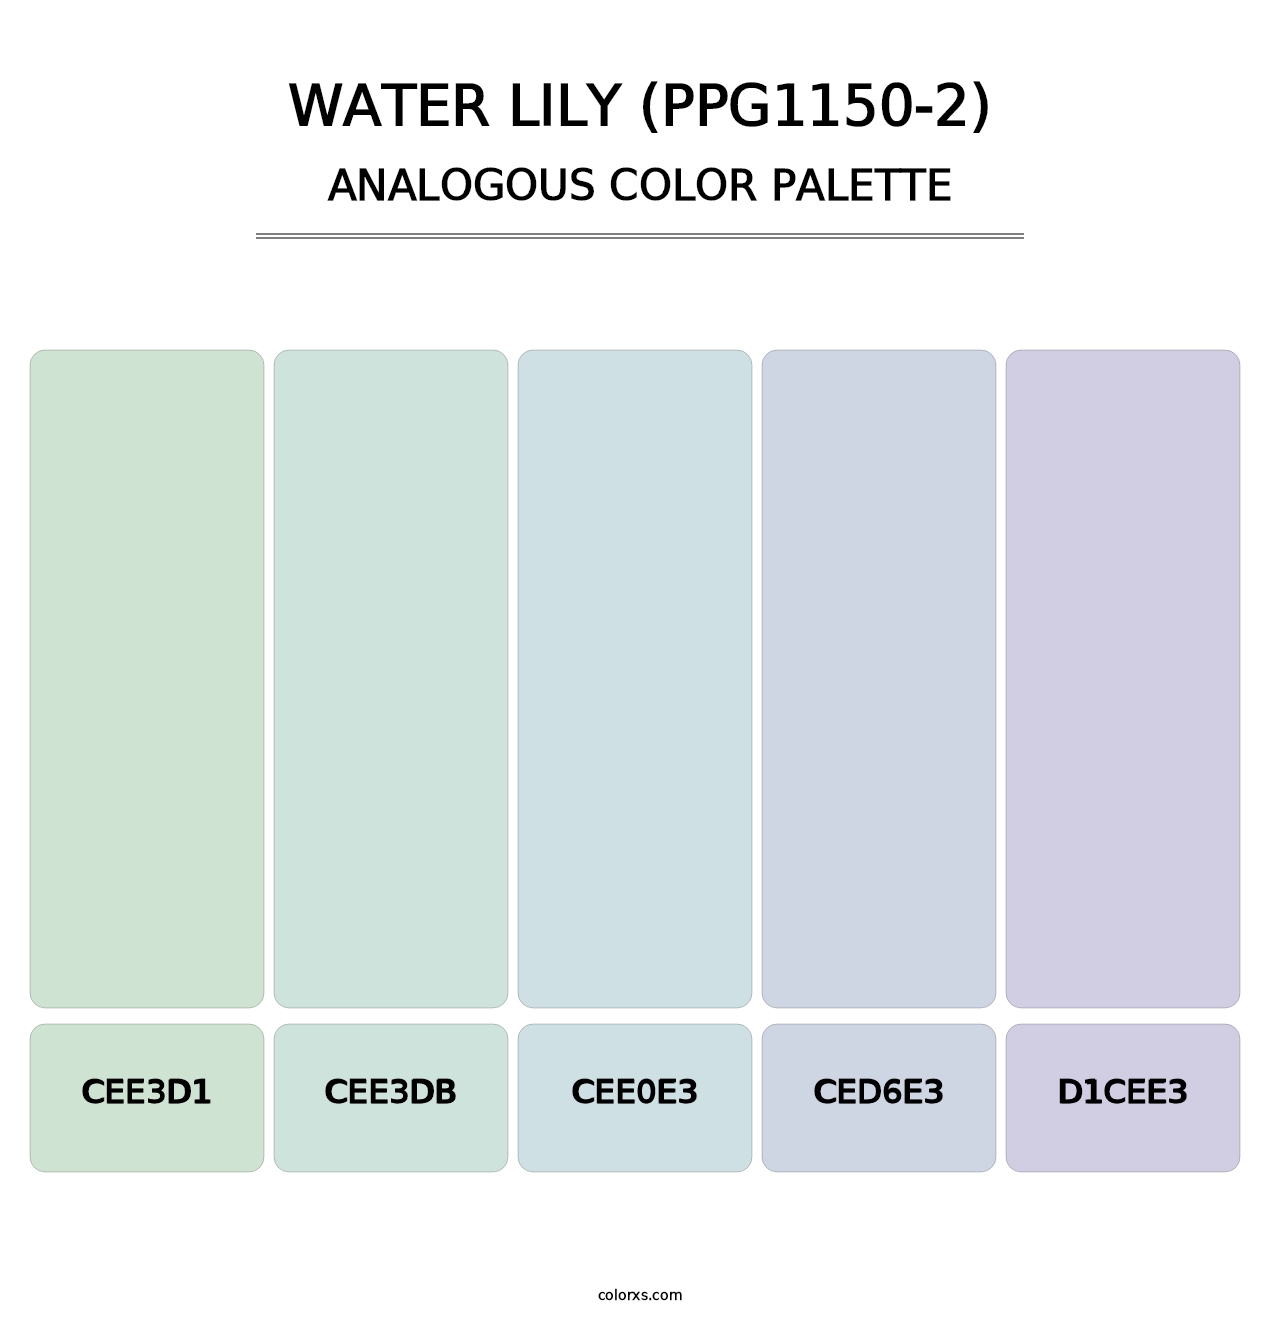 Water Lily (PPG1150-2) - Analogous Color Palette